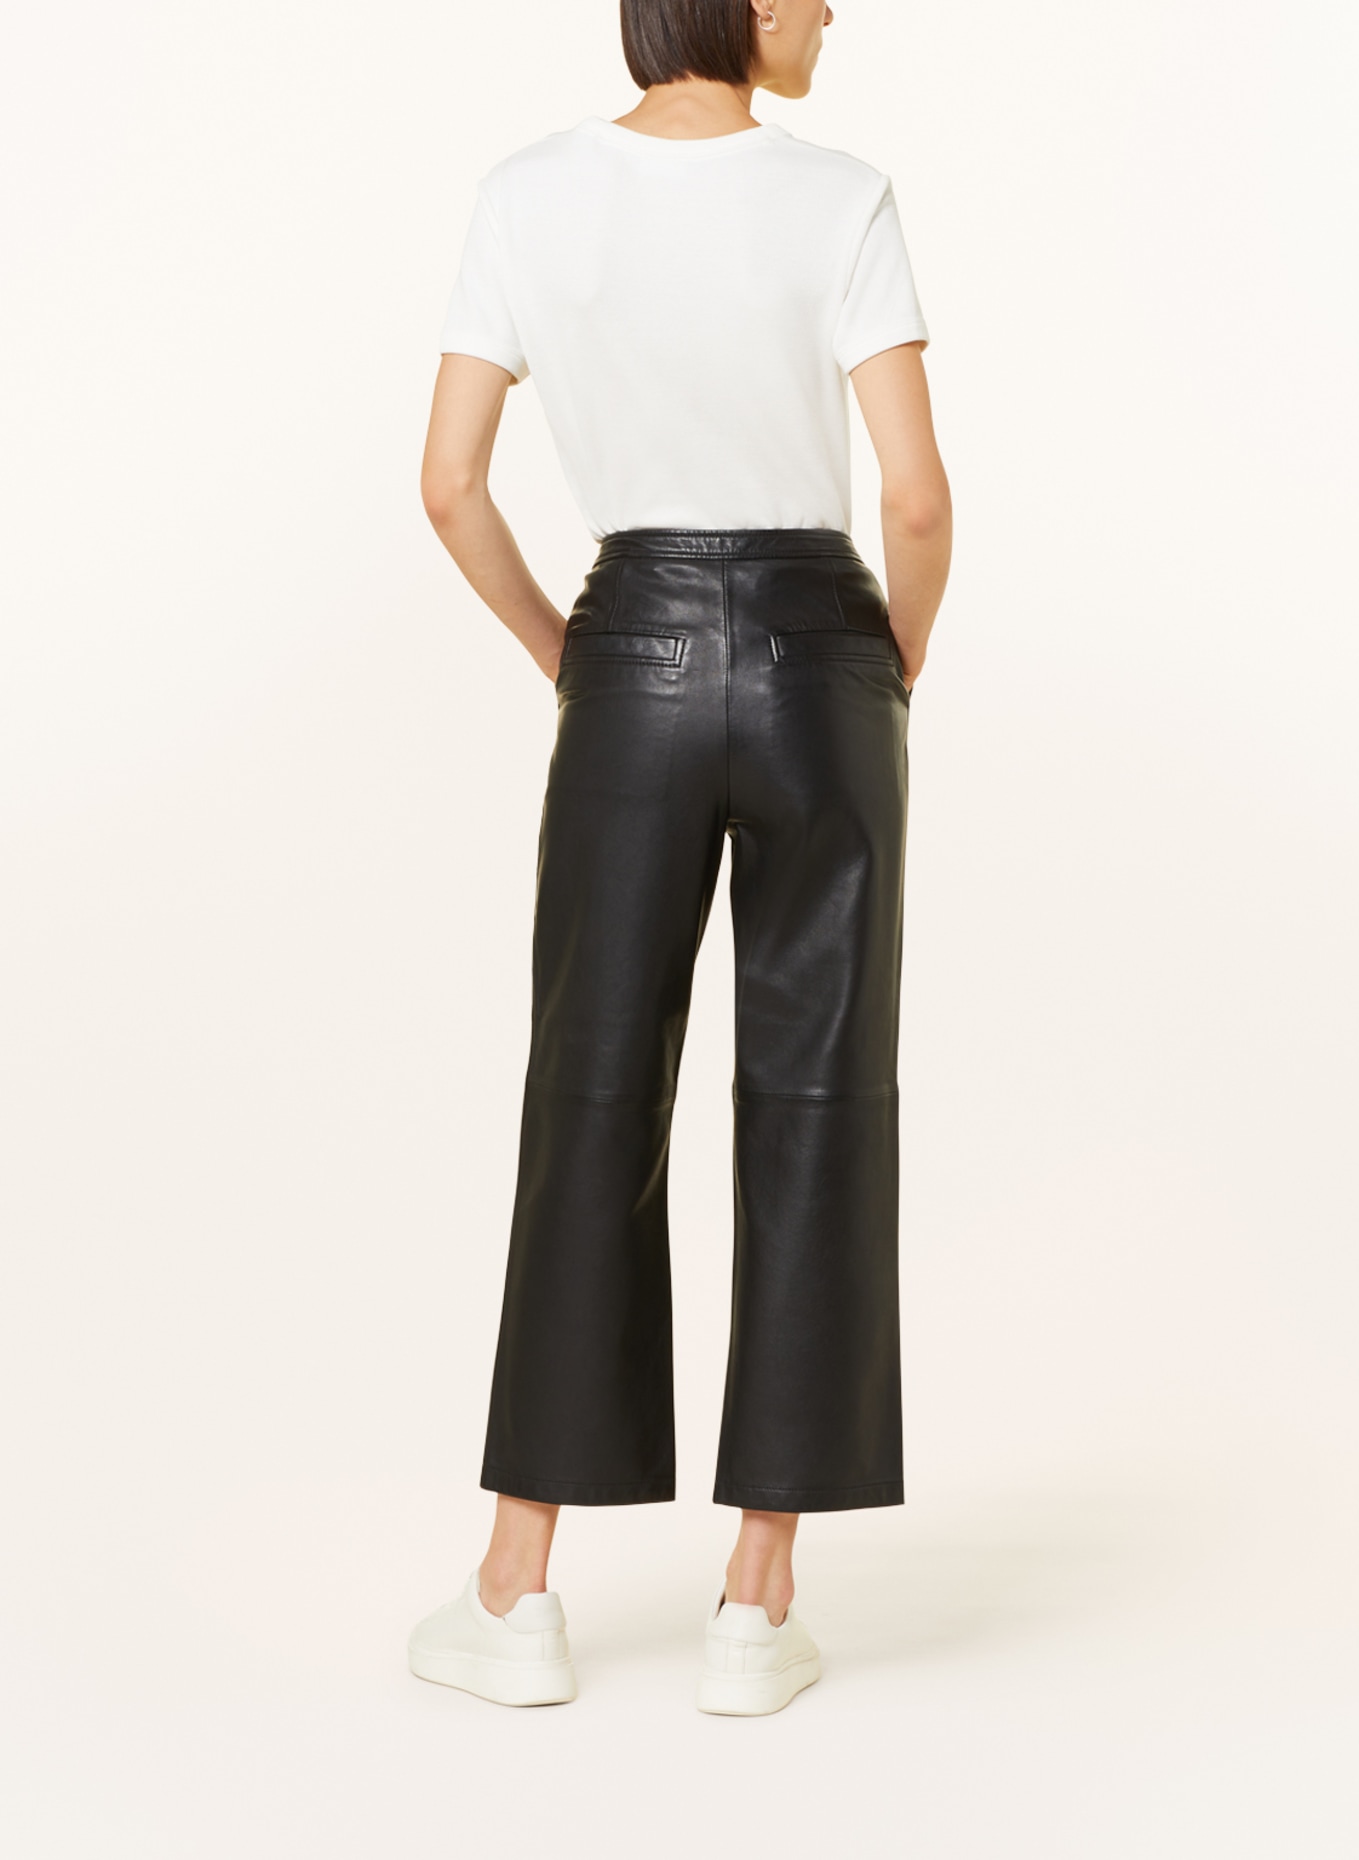 Marc O'Polo 7/8 trousers made of leather, Color: BLACK (Image 3)